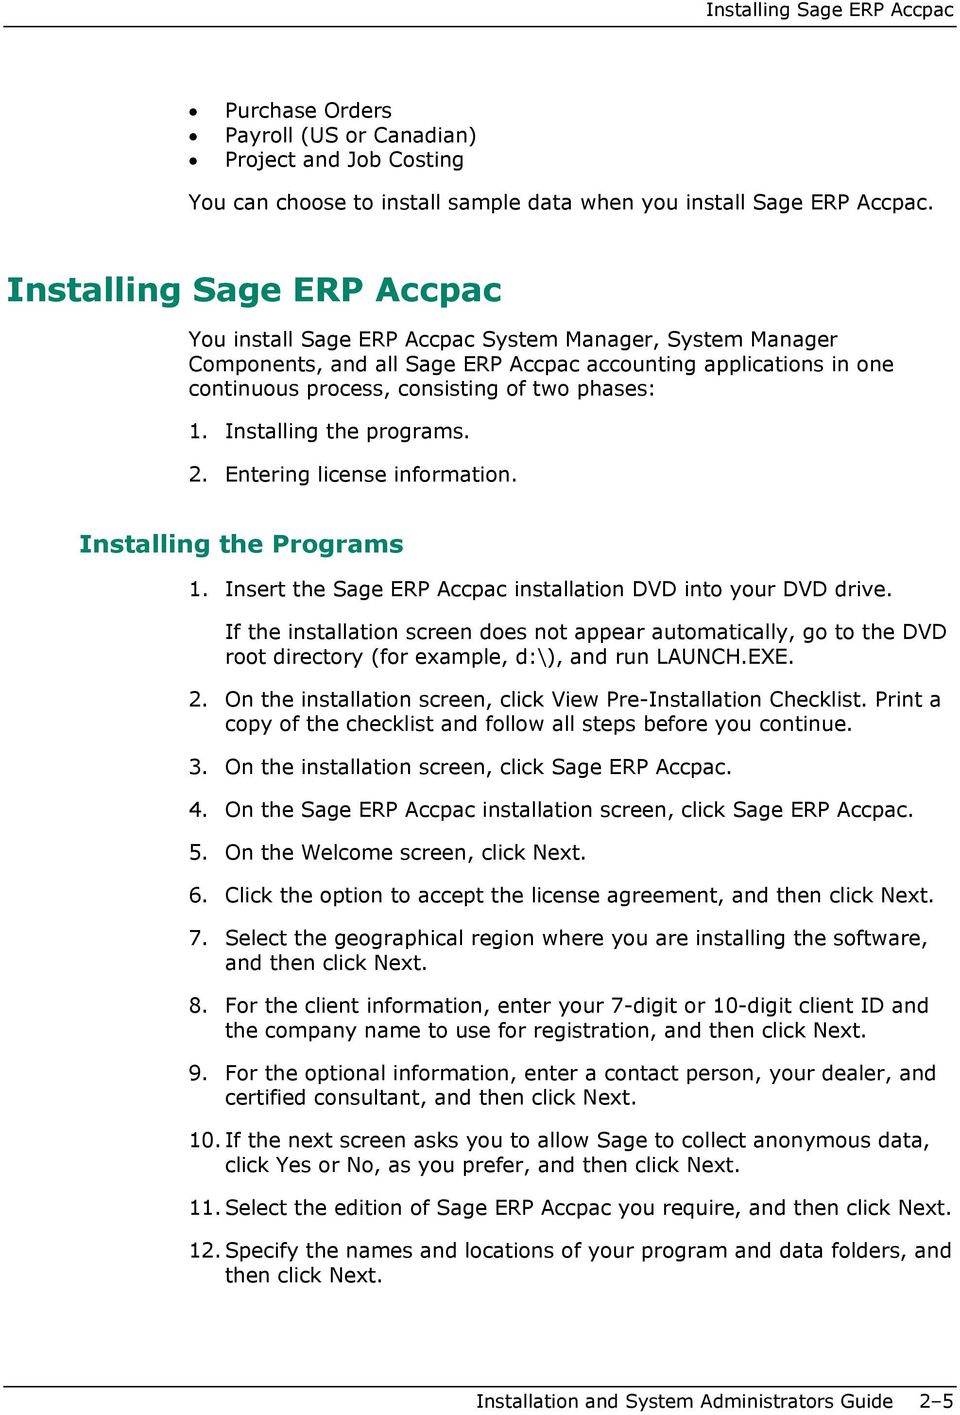 1. Installing the programs. 2. Entering license information. Installing the Programs 1. Insert the Sage ERP Accpac installation DVD into your DVD drive.